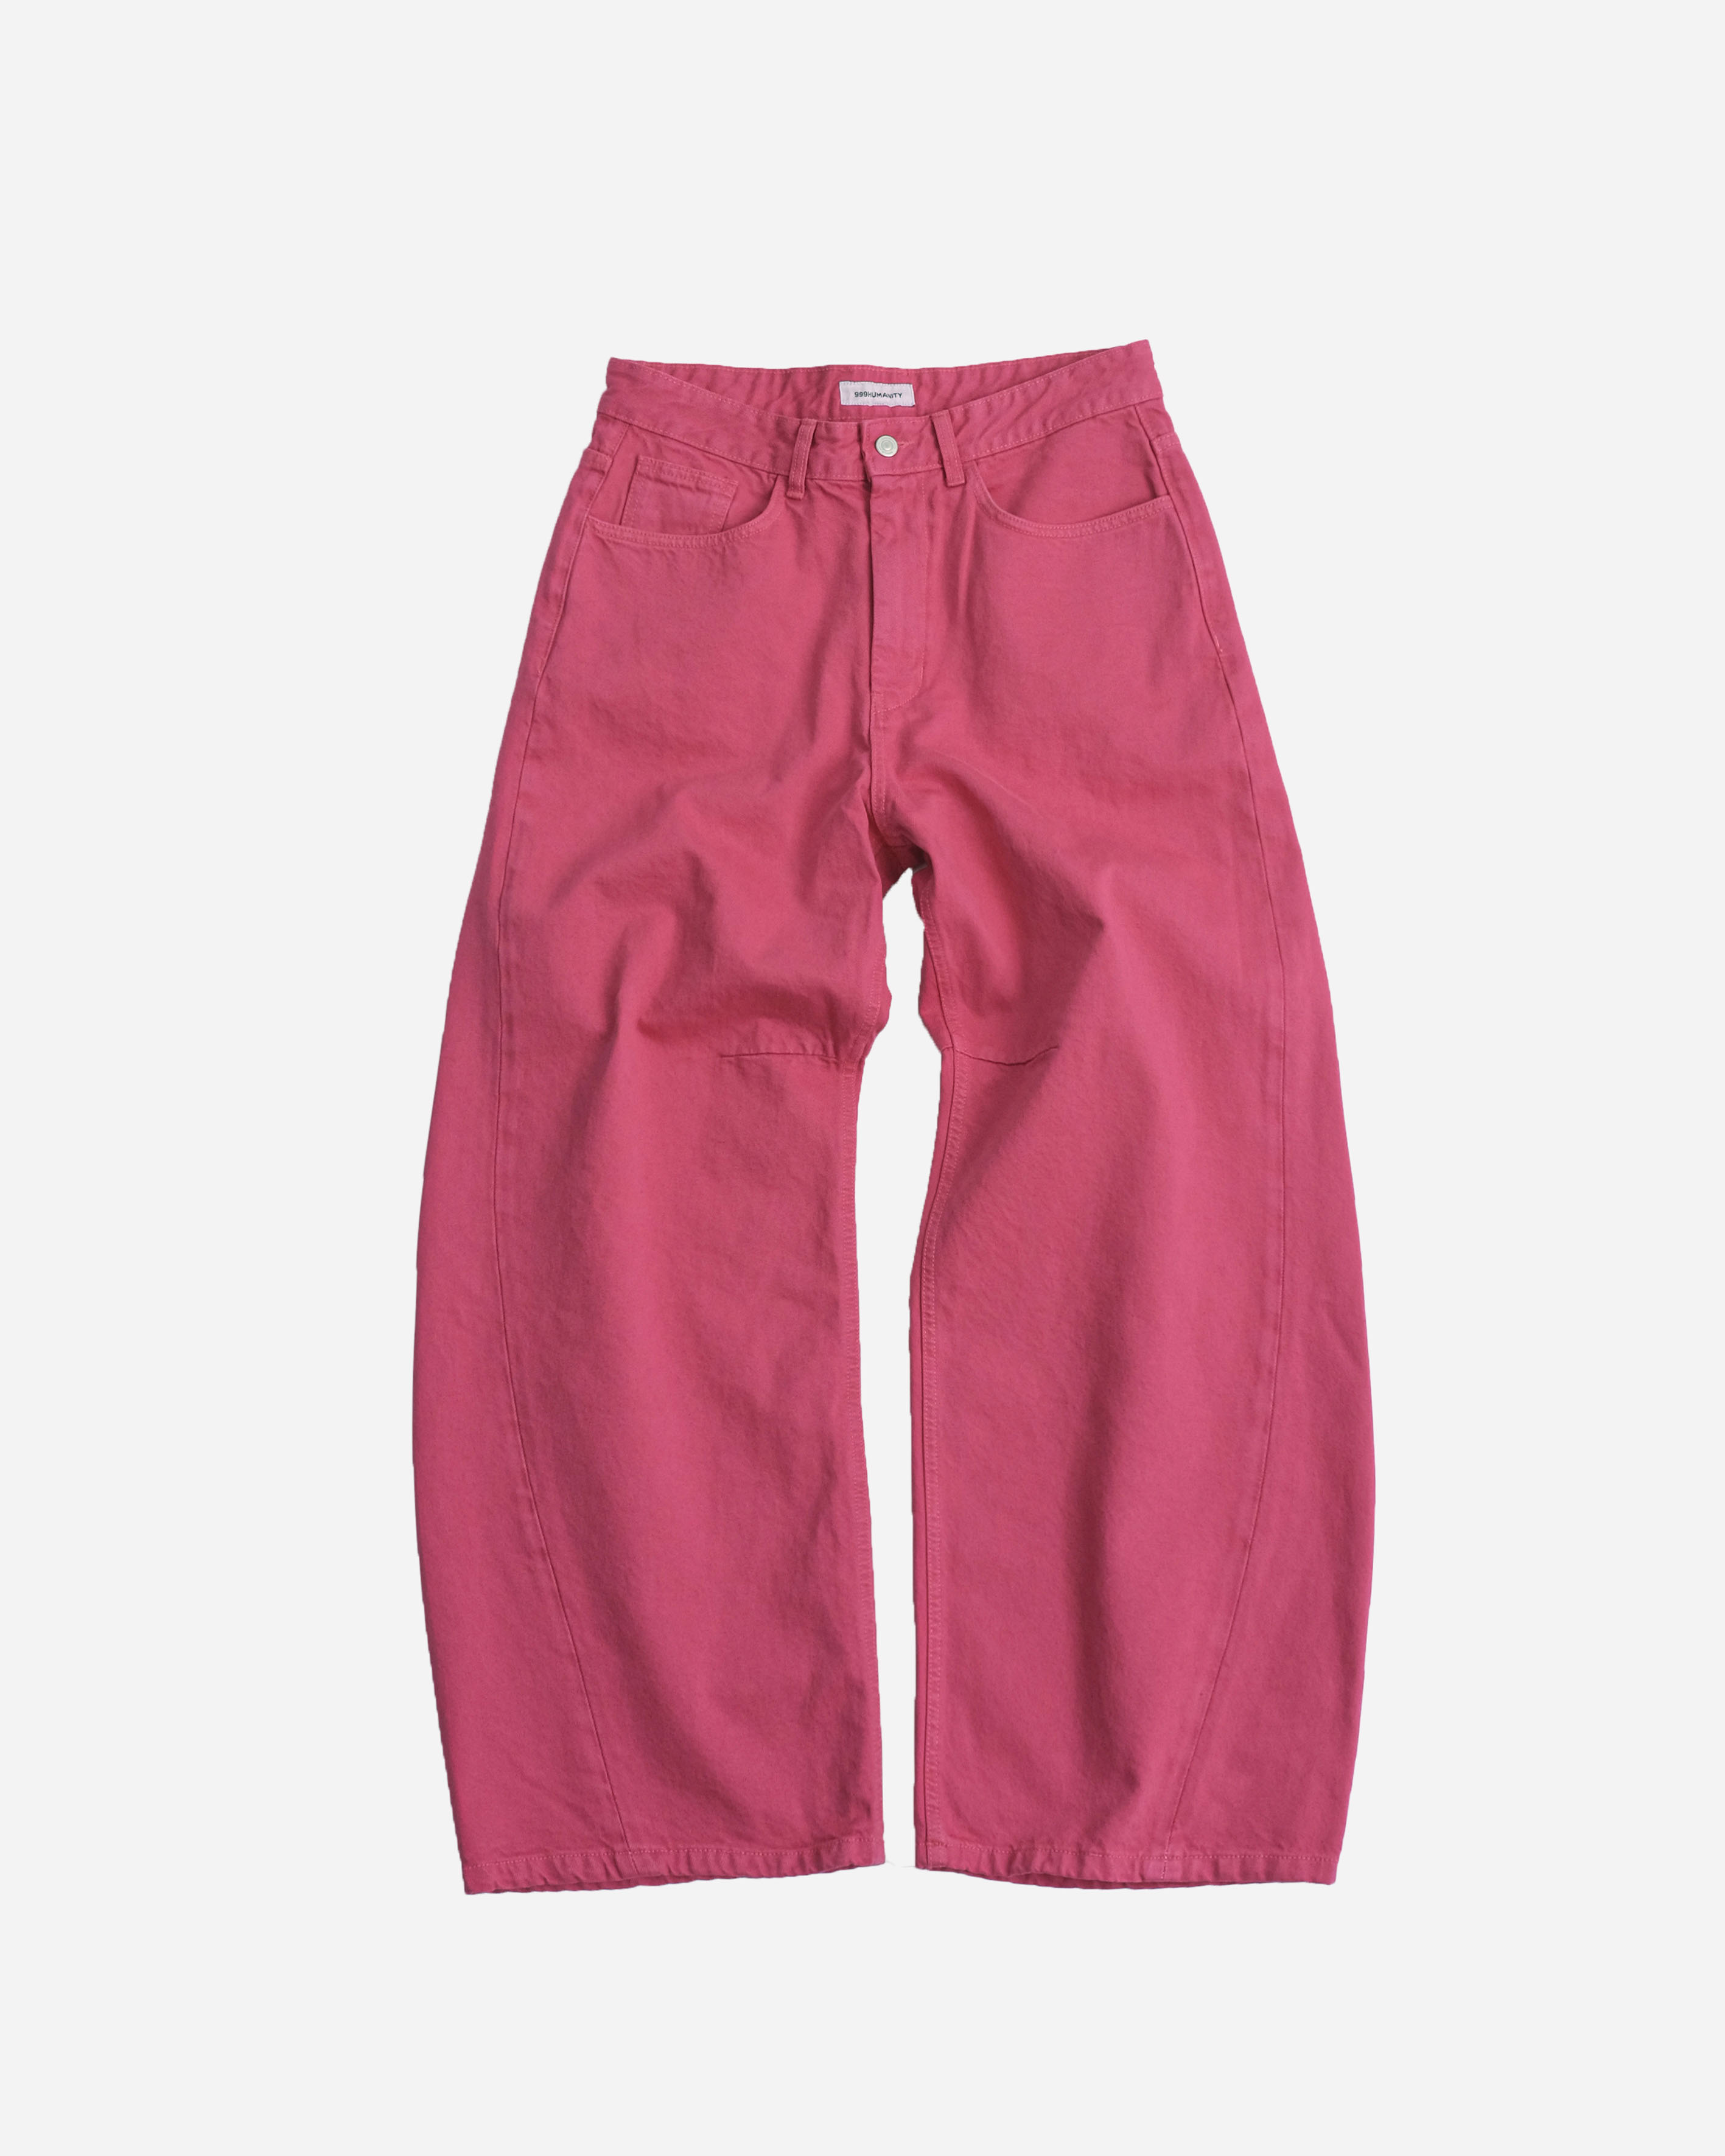 CURVED SULFUR DYED DENIM (HOT PINK)